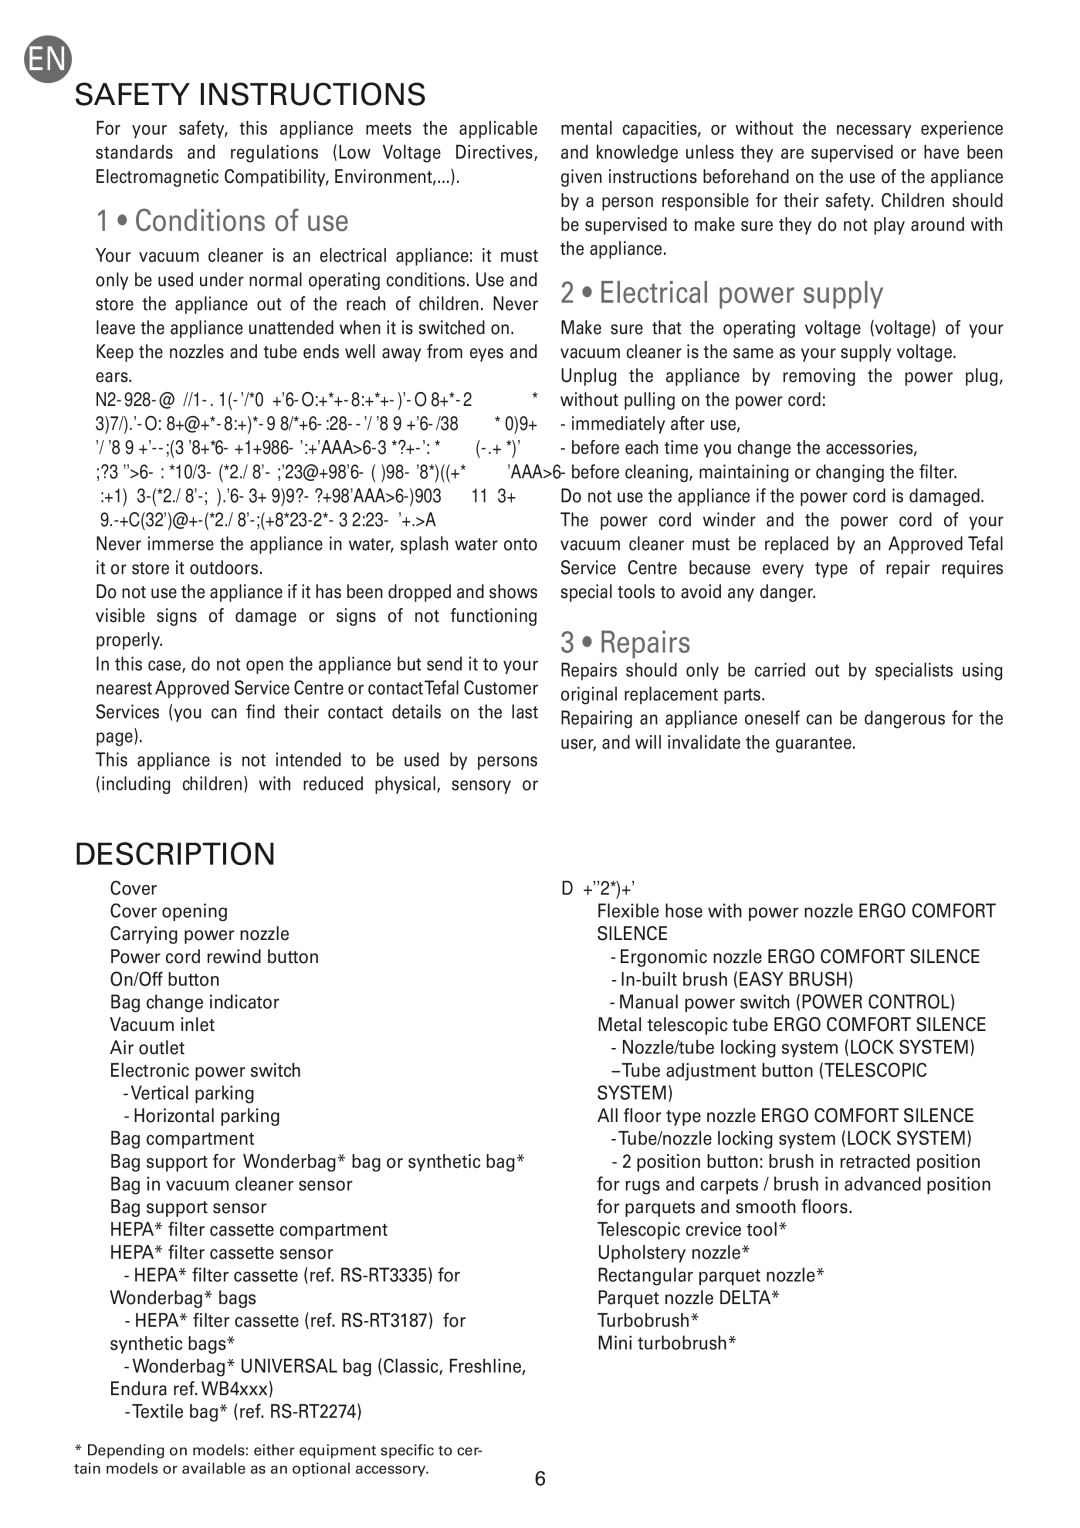 Tefal TW583388 manual Safety Instructions, Conditions of use, Electrical power supply, Repairs 